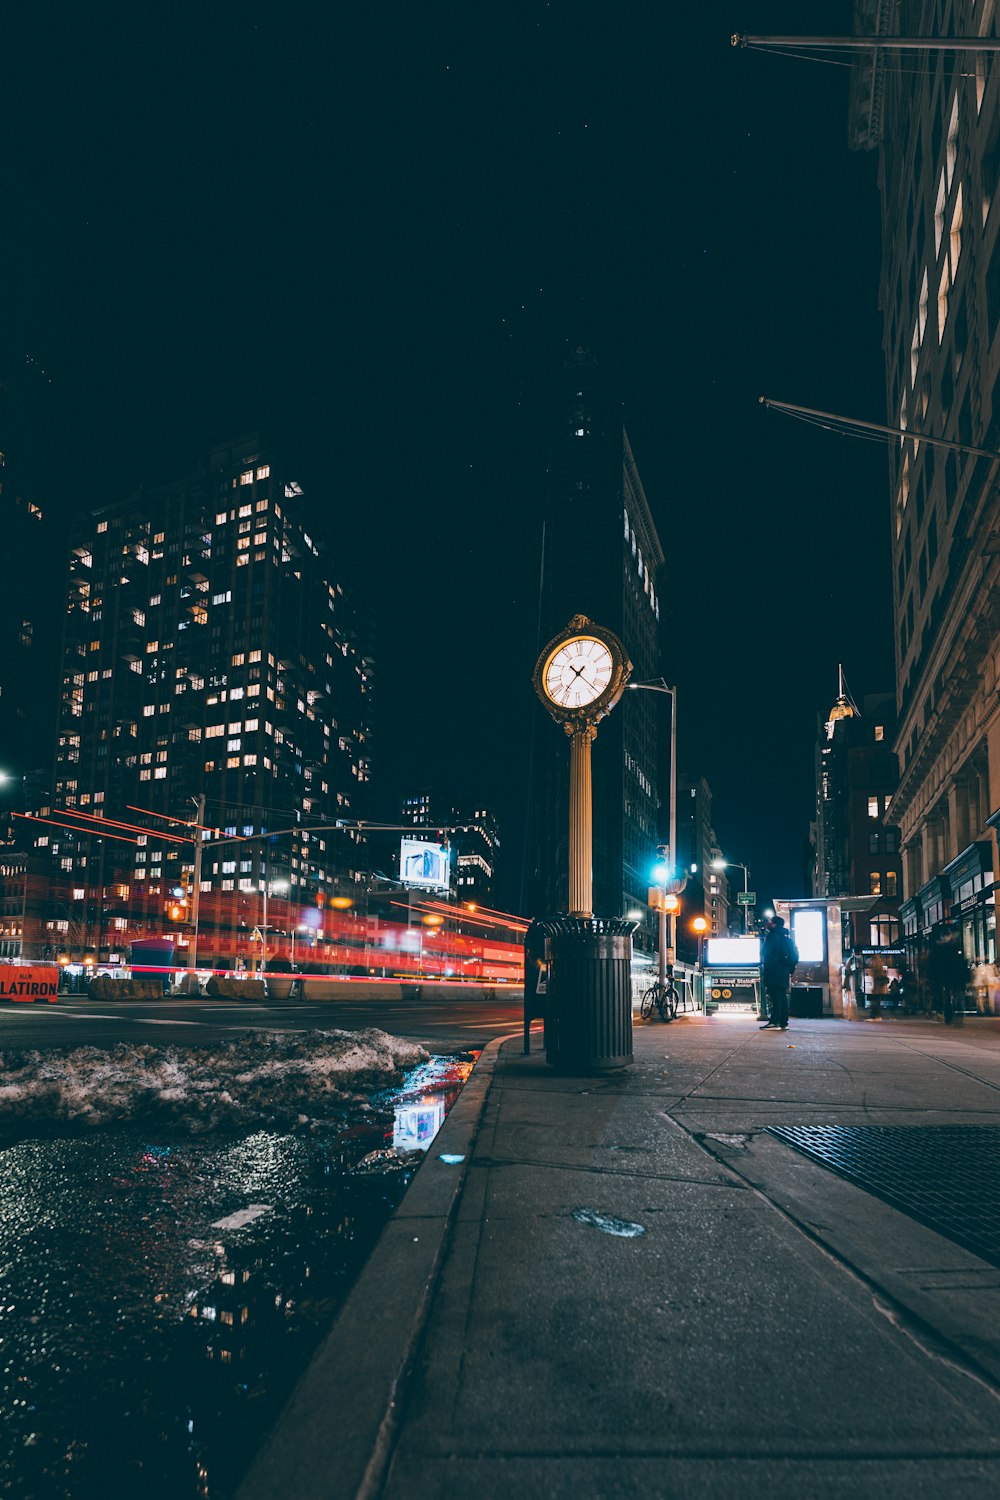 city buildings with street lights during night time